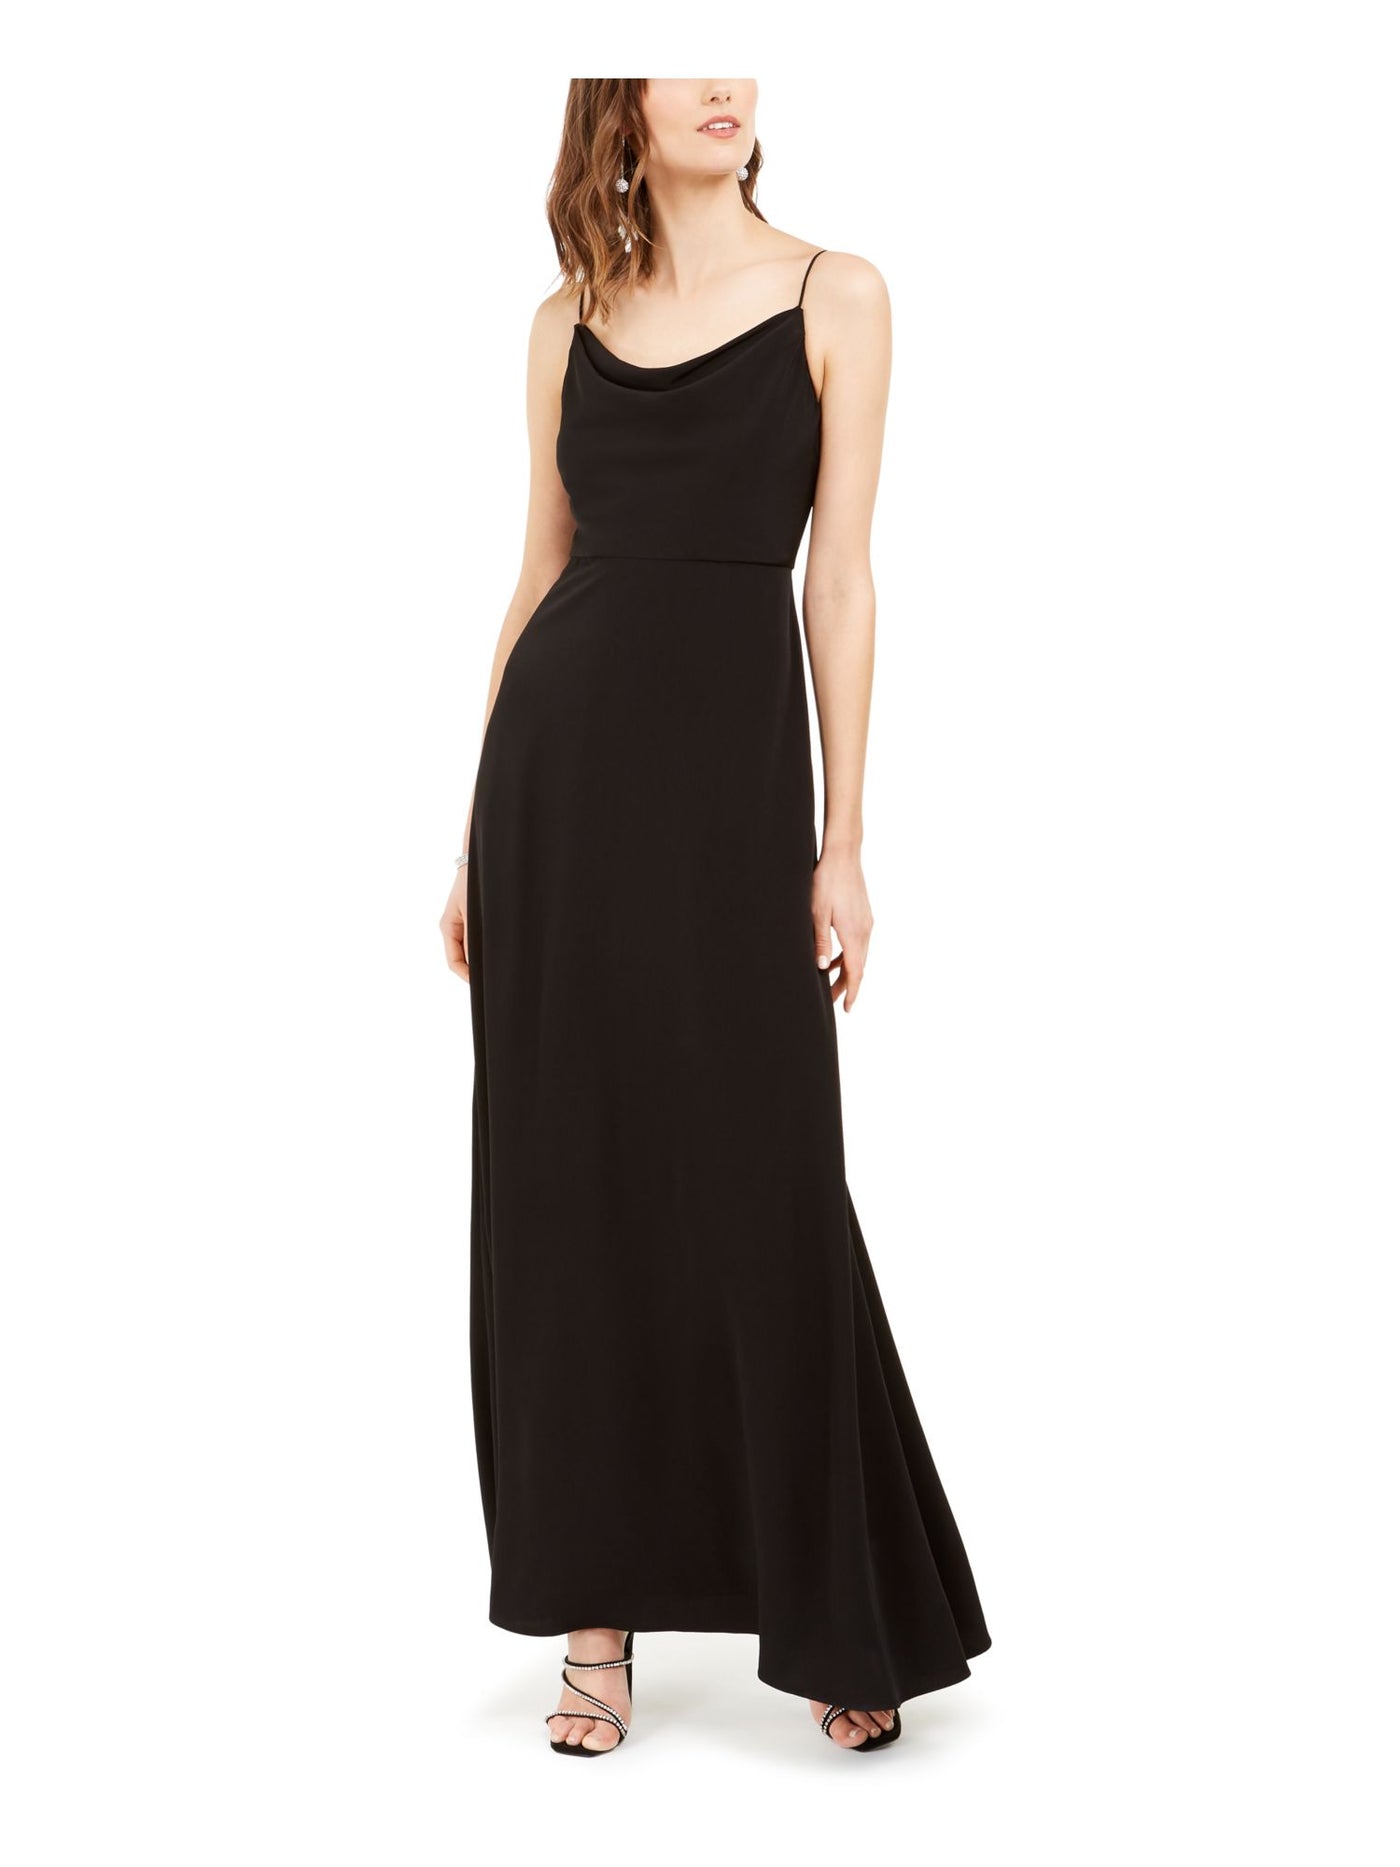 ADRIANNA PAPELL Womens Black Spaghetti Strap Cowl Neck Full-Length Evening Fit + Flare Dress 2